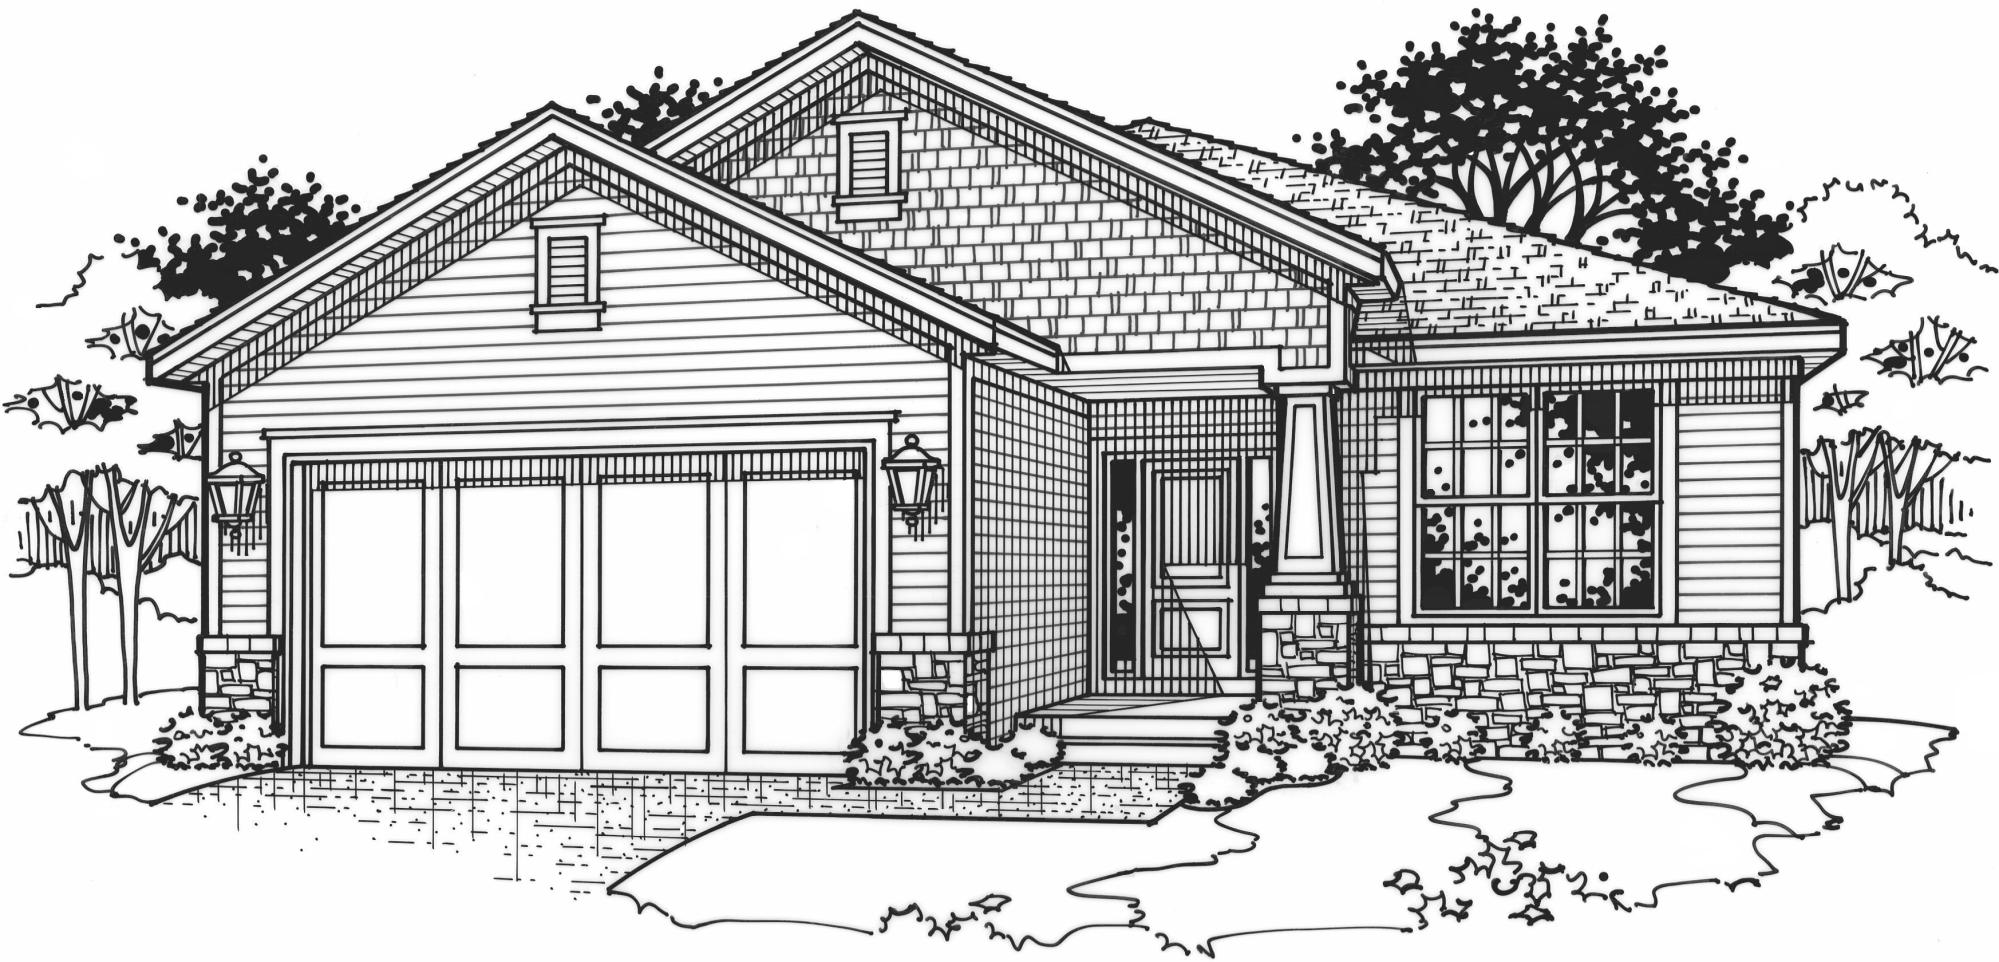 black and white rendering of a Somerset model from Lambie custom homes